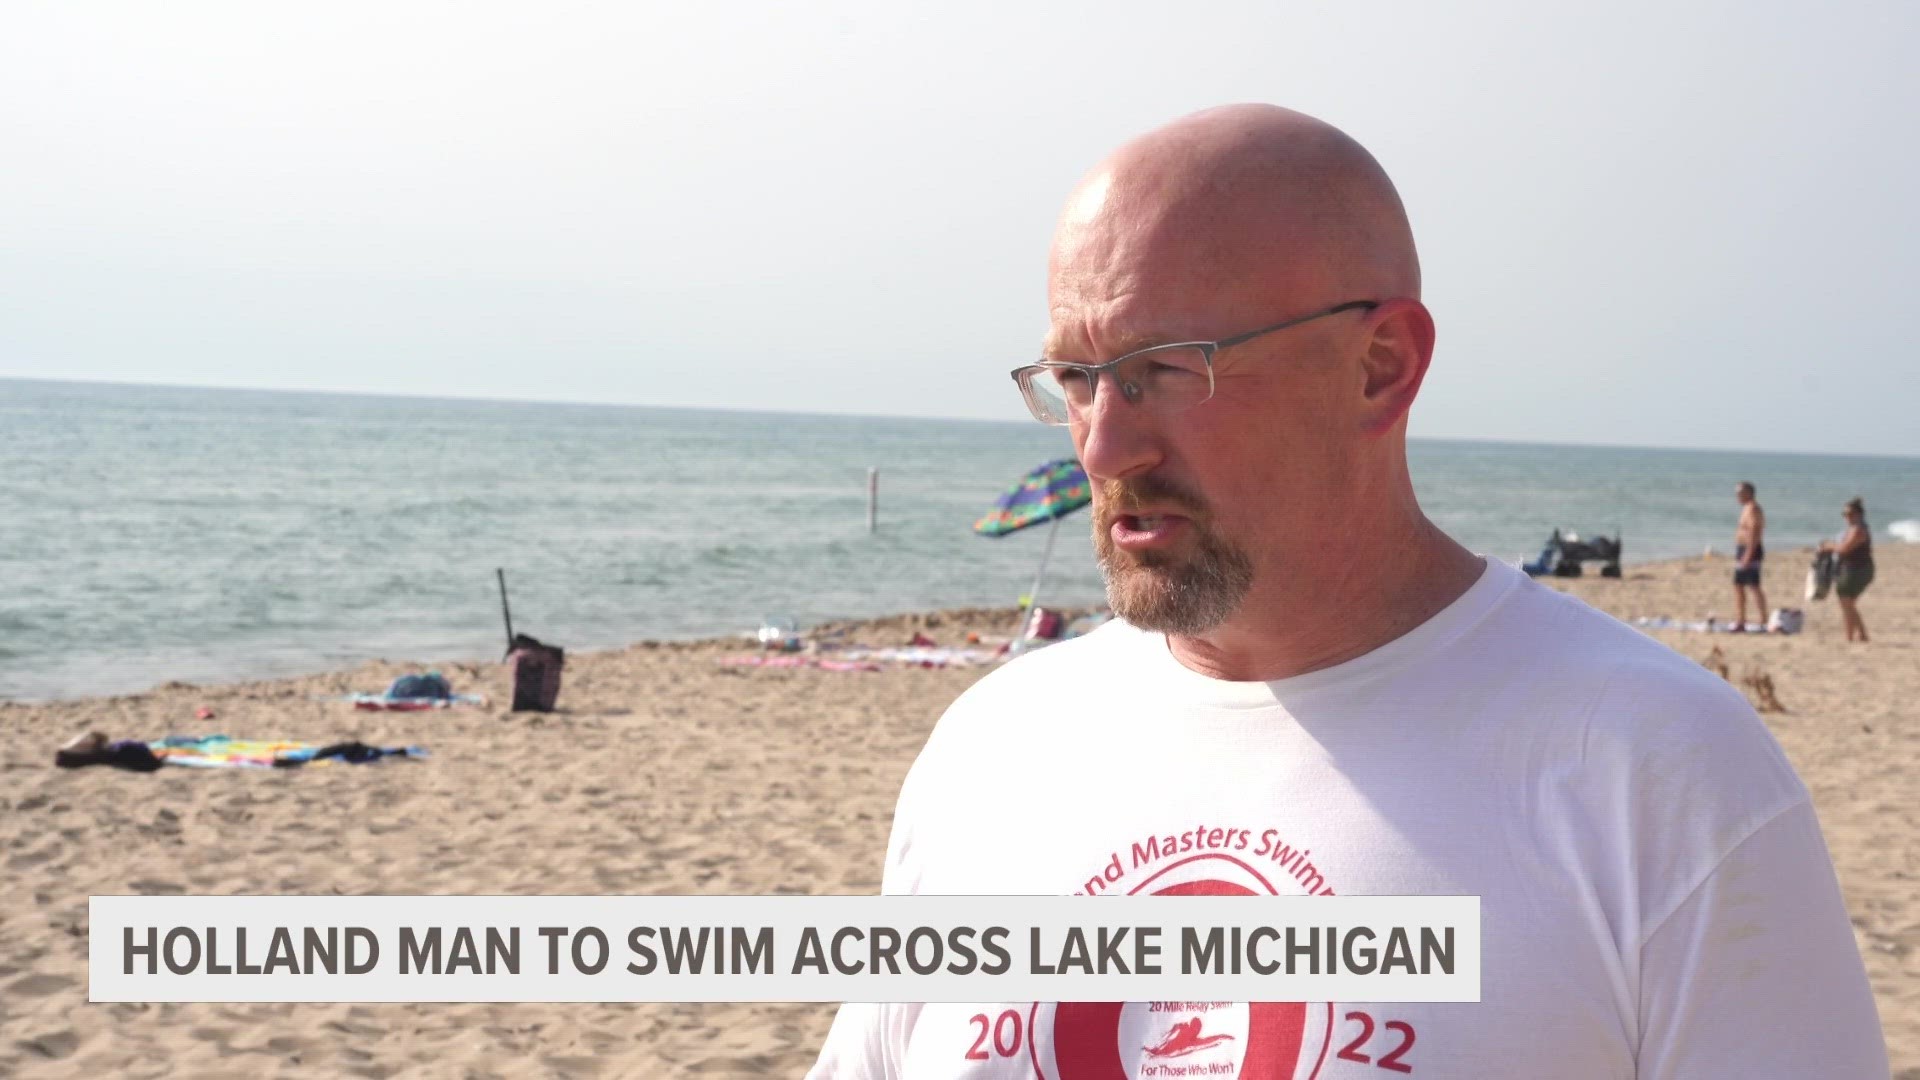 50-year-old Bryan Huffman will attempt to swim across Lake Michigan in August to raise money for free community swim lessons at Holland Aquatic Center.